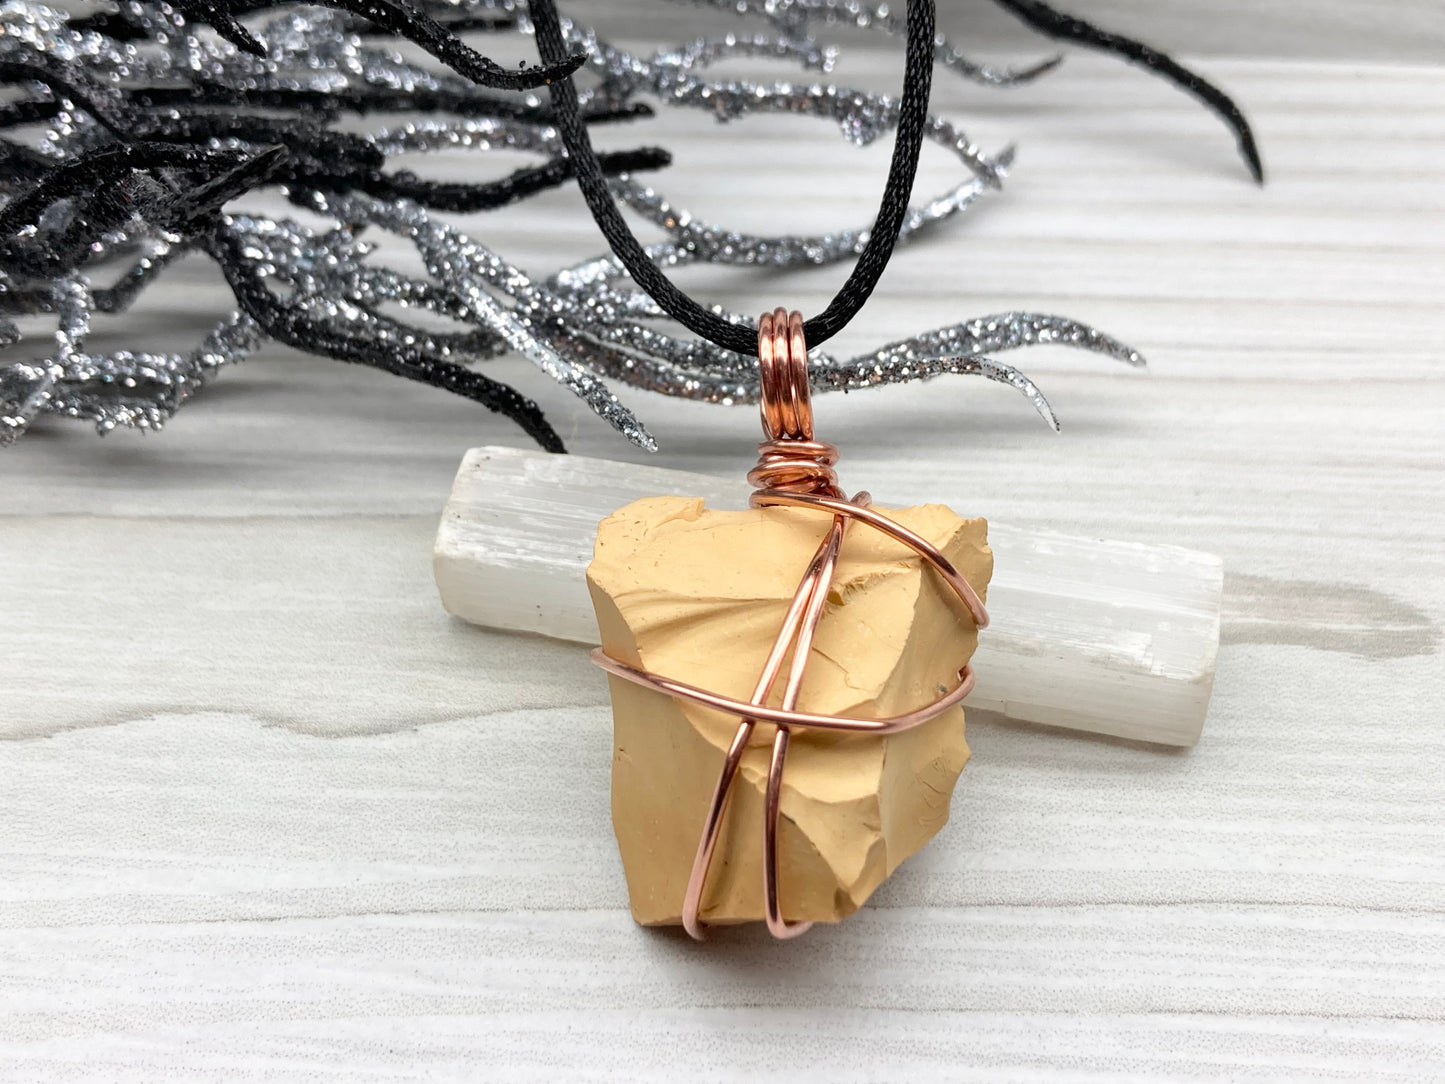 Natural Mookaite Jasper Necklace. Cream Colored Raw Mookaite Crystal Wrapped With Pure Copper Wire.  Comes On A Black Chain. Handmade Spiritual Gemstone Jewelry. Made In The USA.